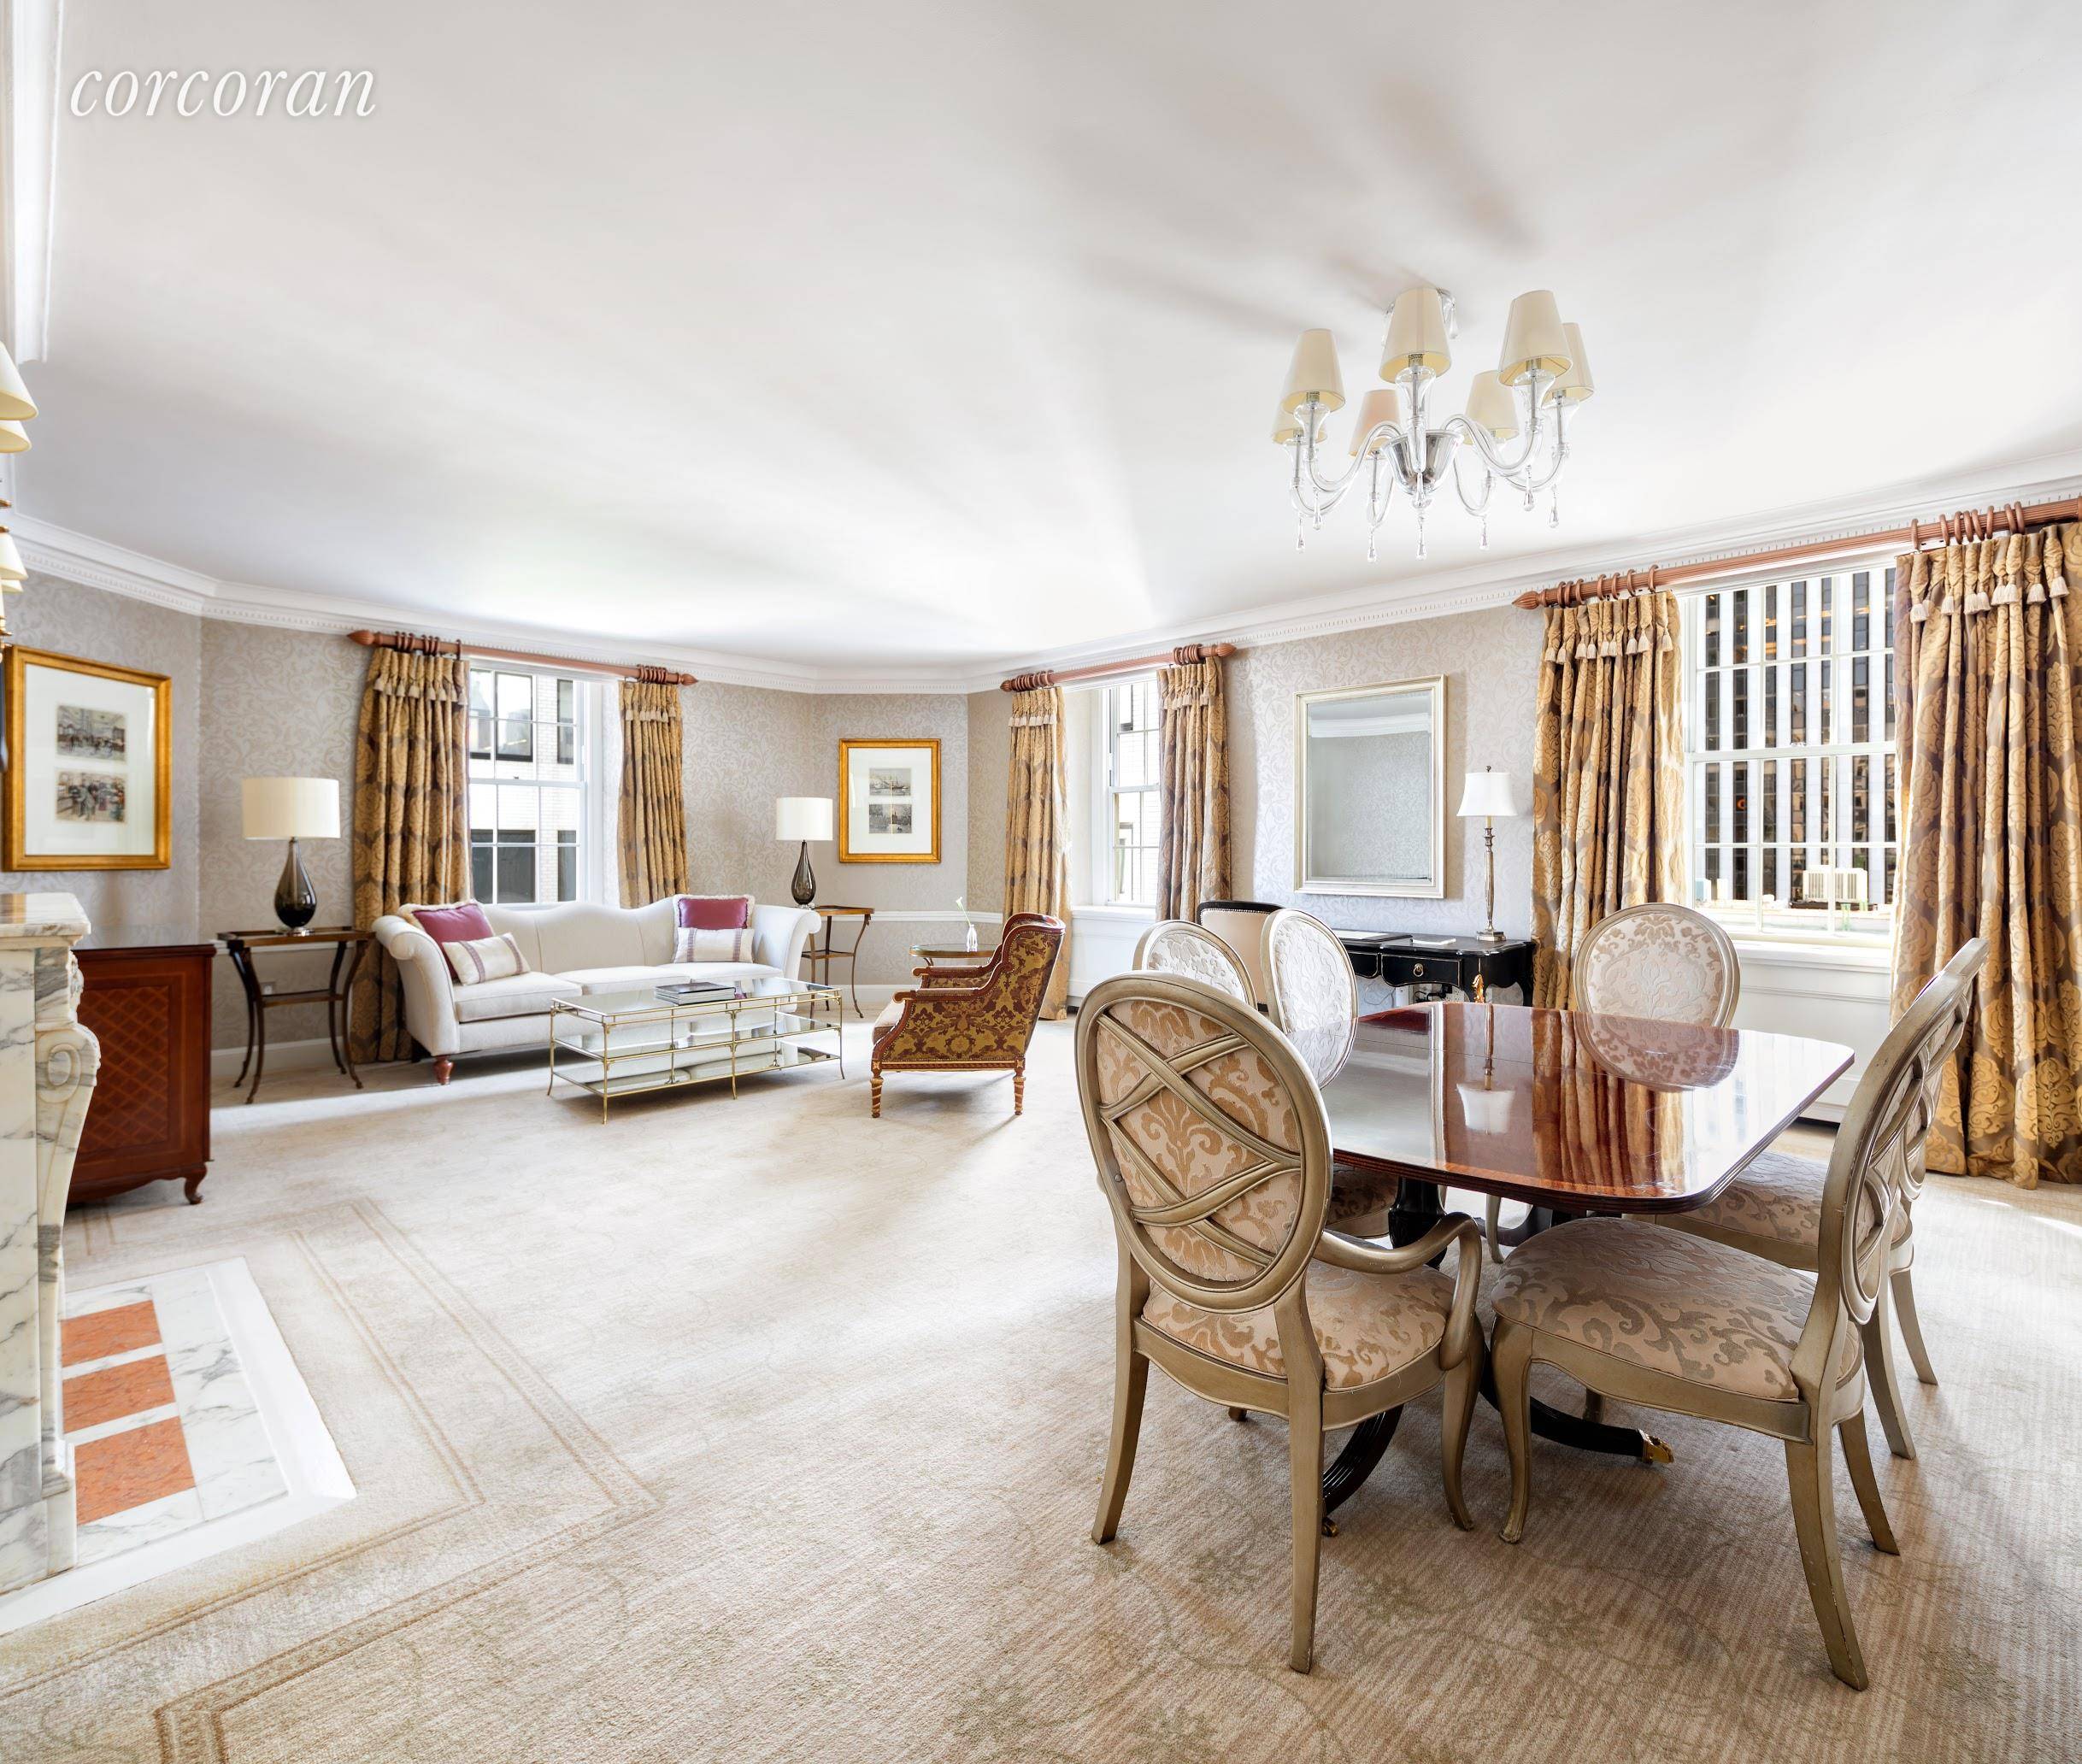 Set on the 17th floor of The Pierre, this luxurious corner residence features open views of the Upper East Side.